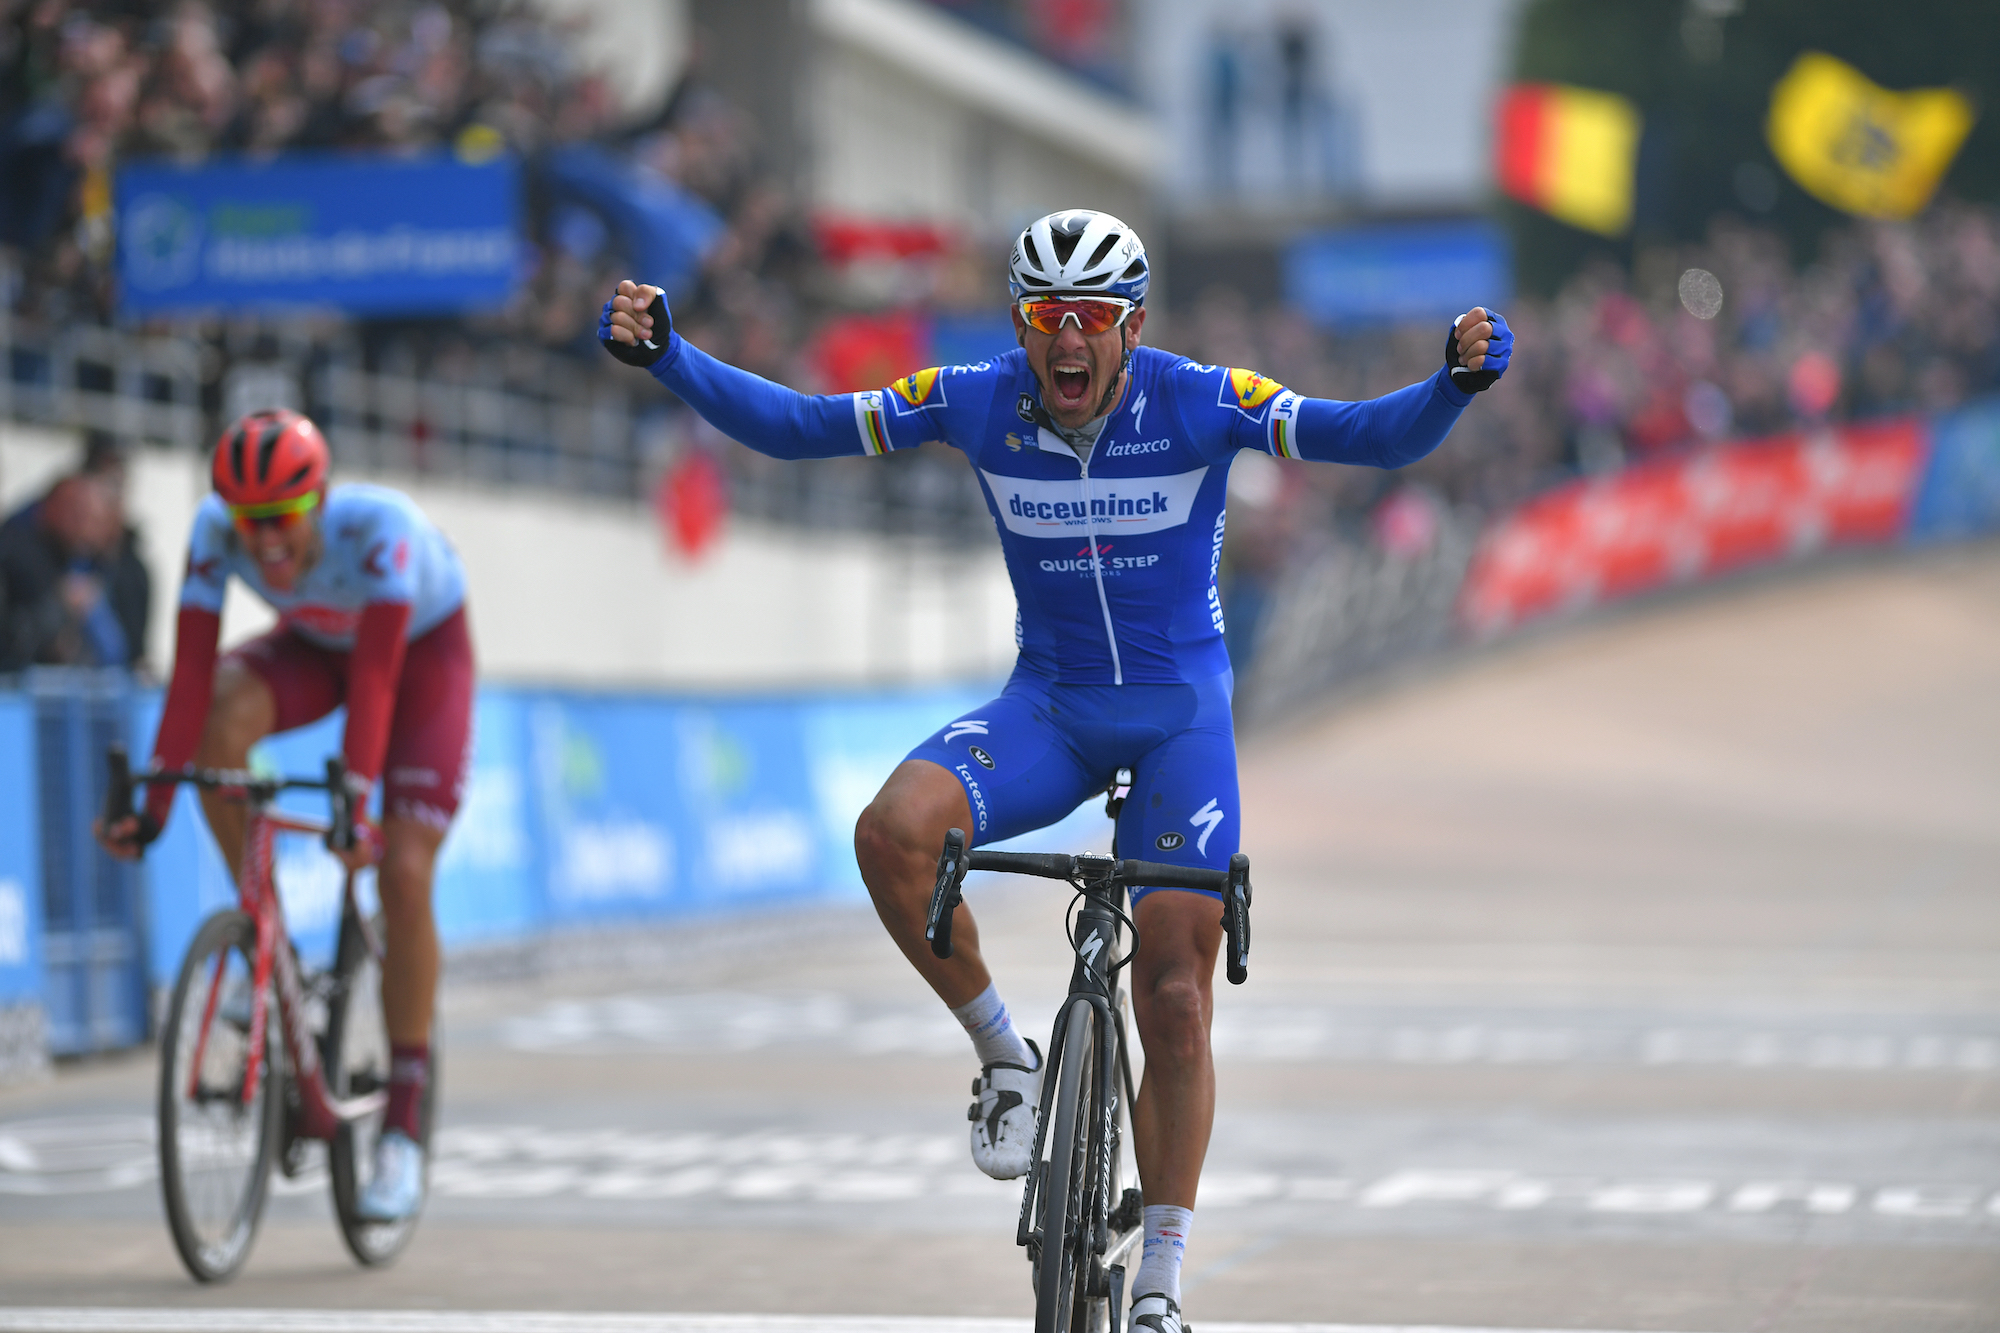 Philippe Gilbert wins Paris-Roubaix 2019 in velodrome sprint finish Cycling Weekly